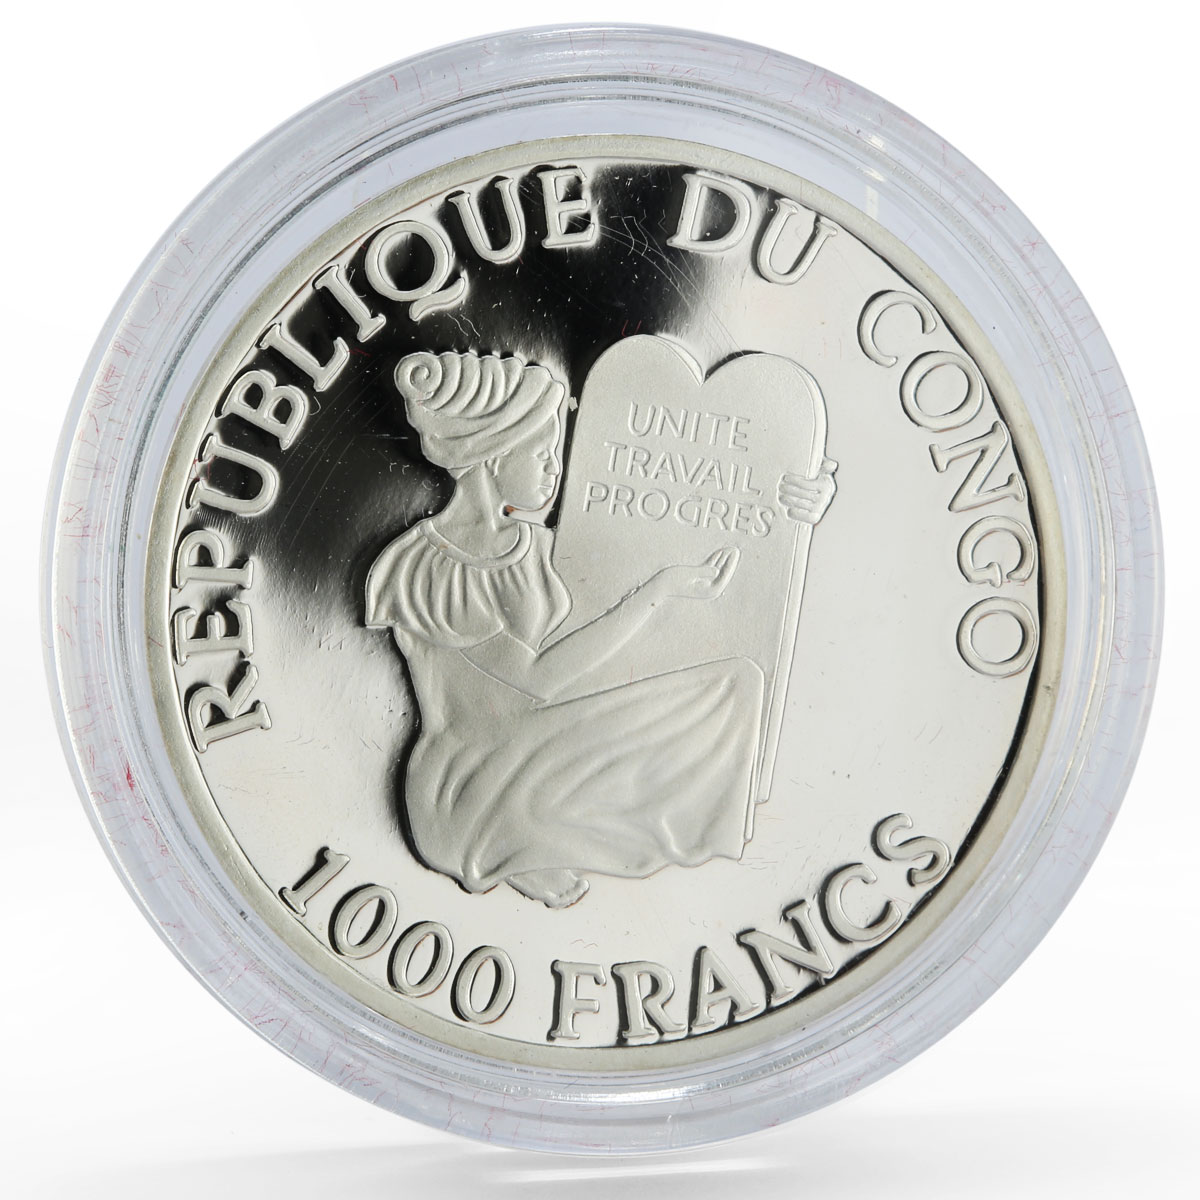 Congo 1000 francs Football World Cup in France Player proof silver coin 1997